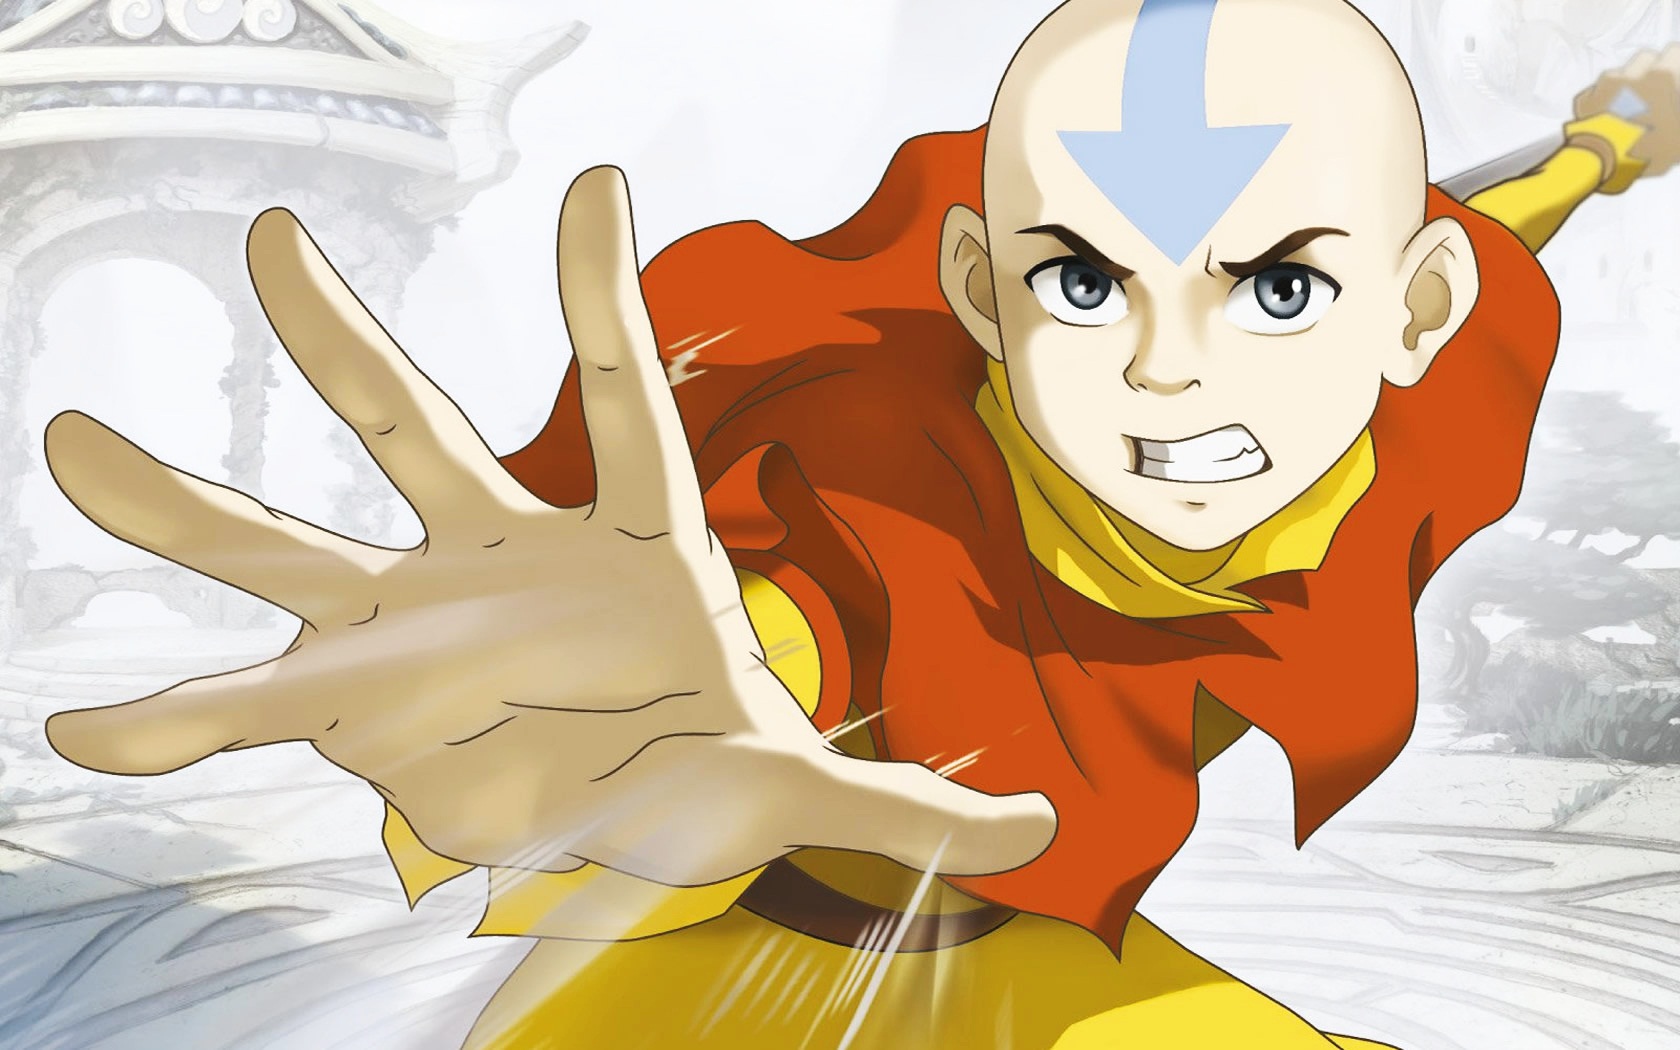 Avatar: The Last Airbender Images.